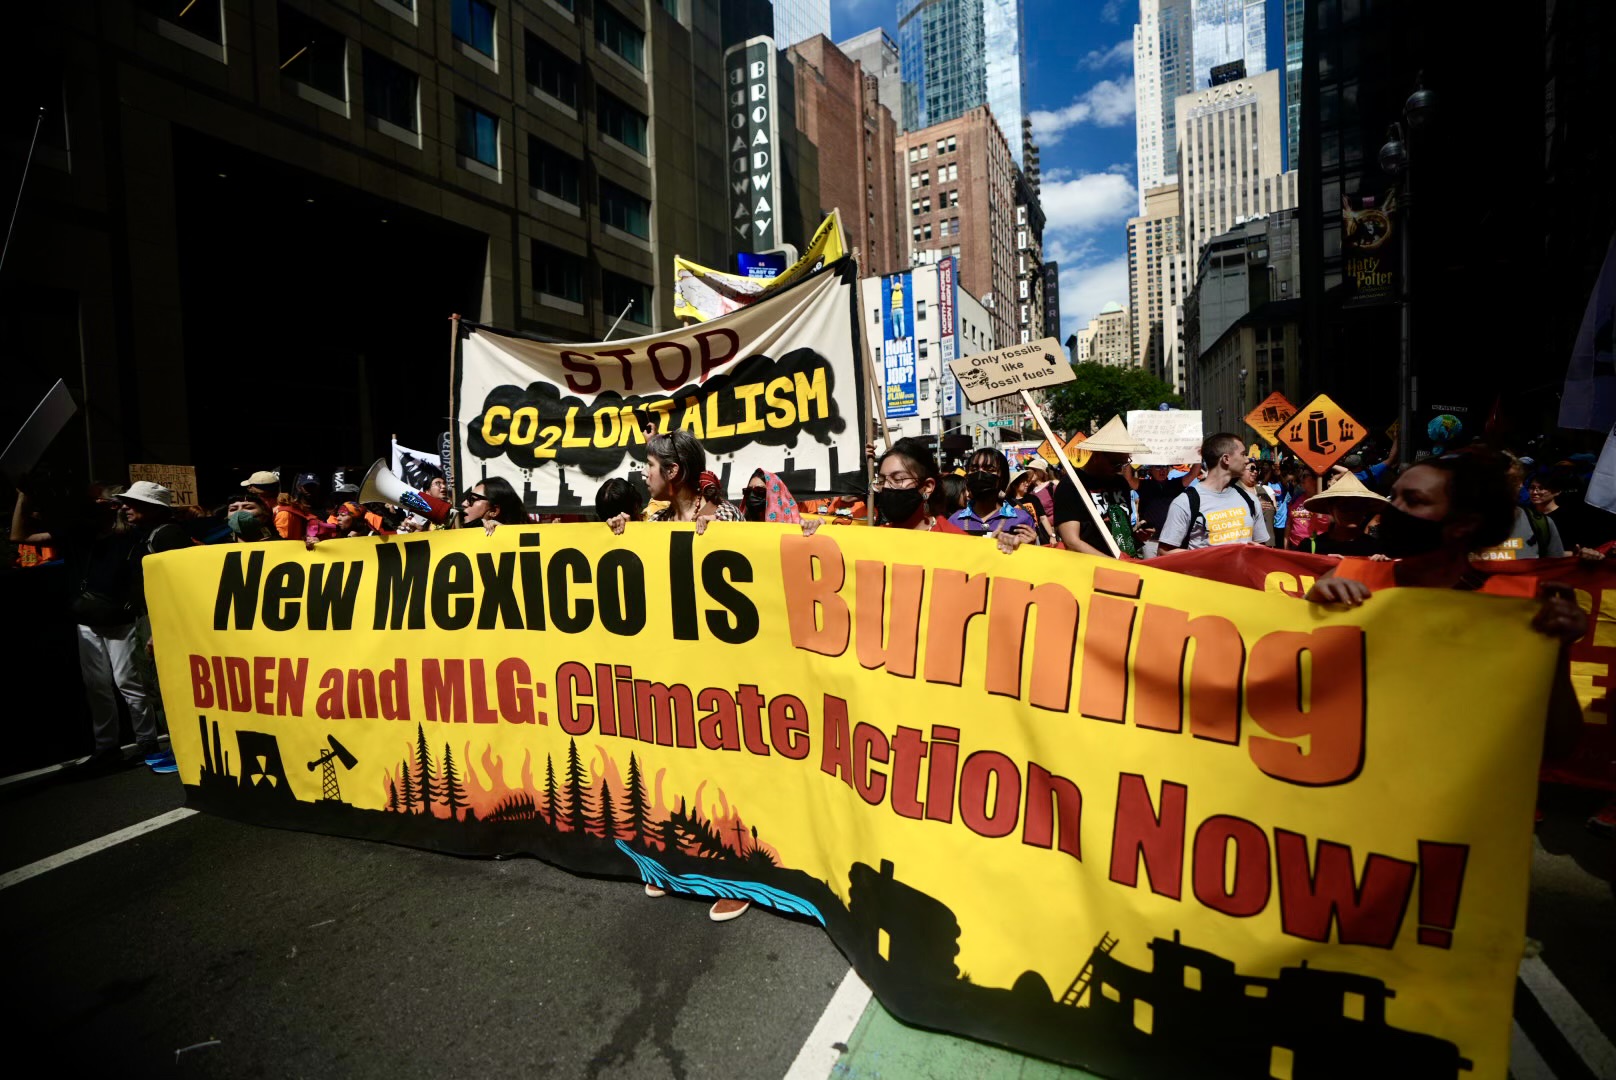 NM advocates join NYC march calling for the end of fossil fuels